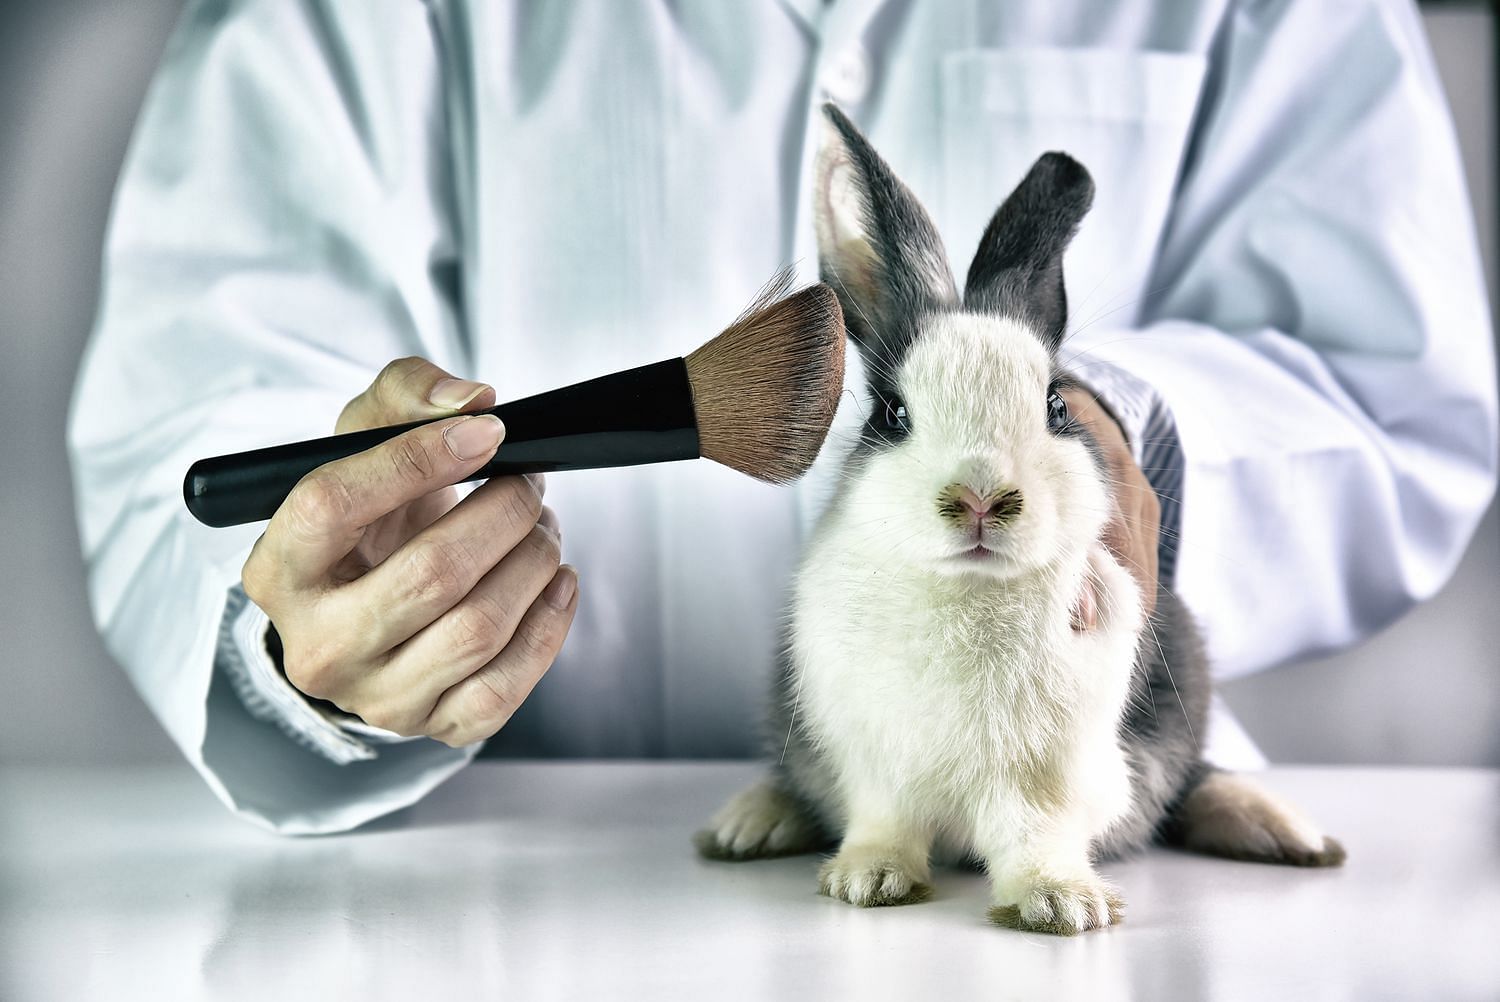 Cruelty-free alternatives are cheaper, faster, and more accurate than animal testing (Image source/ Tree Hugger)